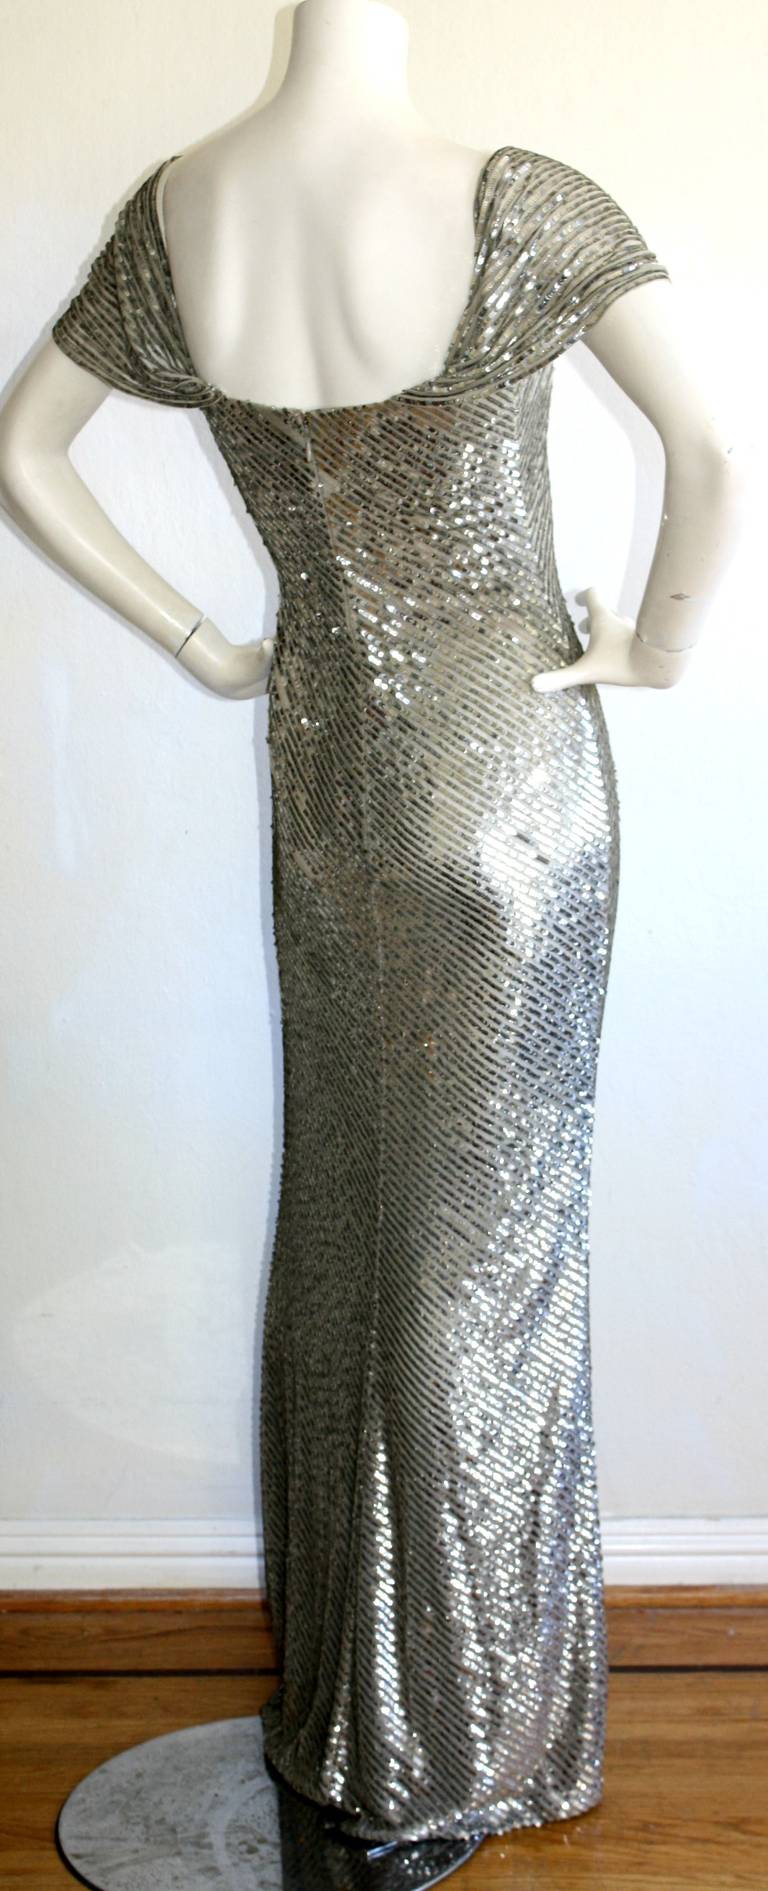 Bill Blass Haute Couture Silver Sequin Vintage Mermaid Gown New w/ Tags $7, 250 2